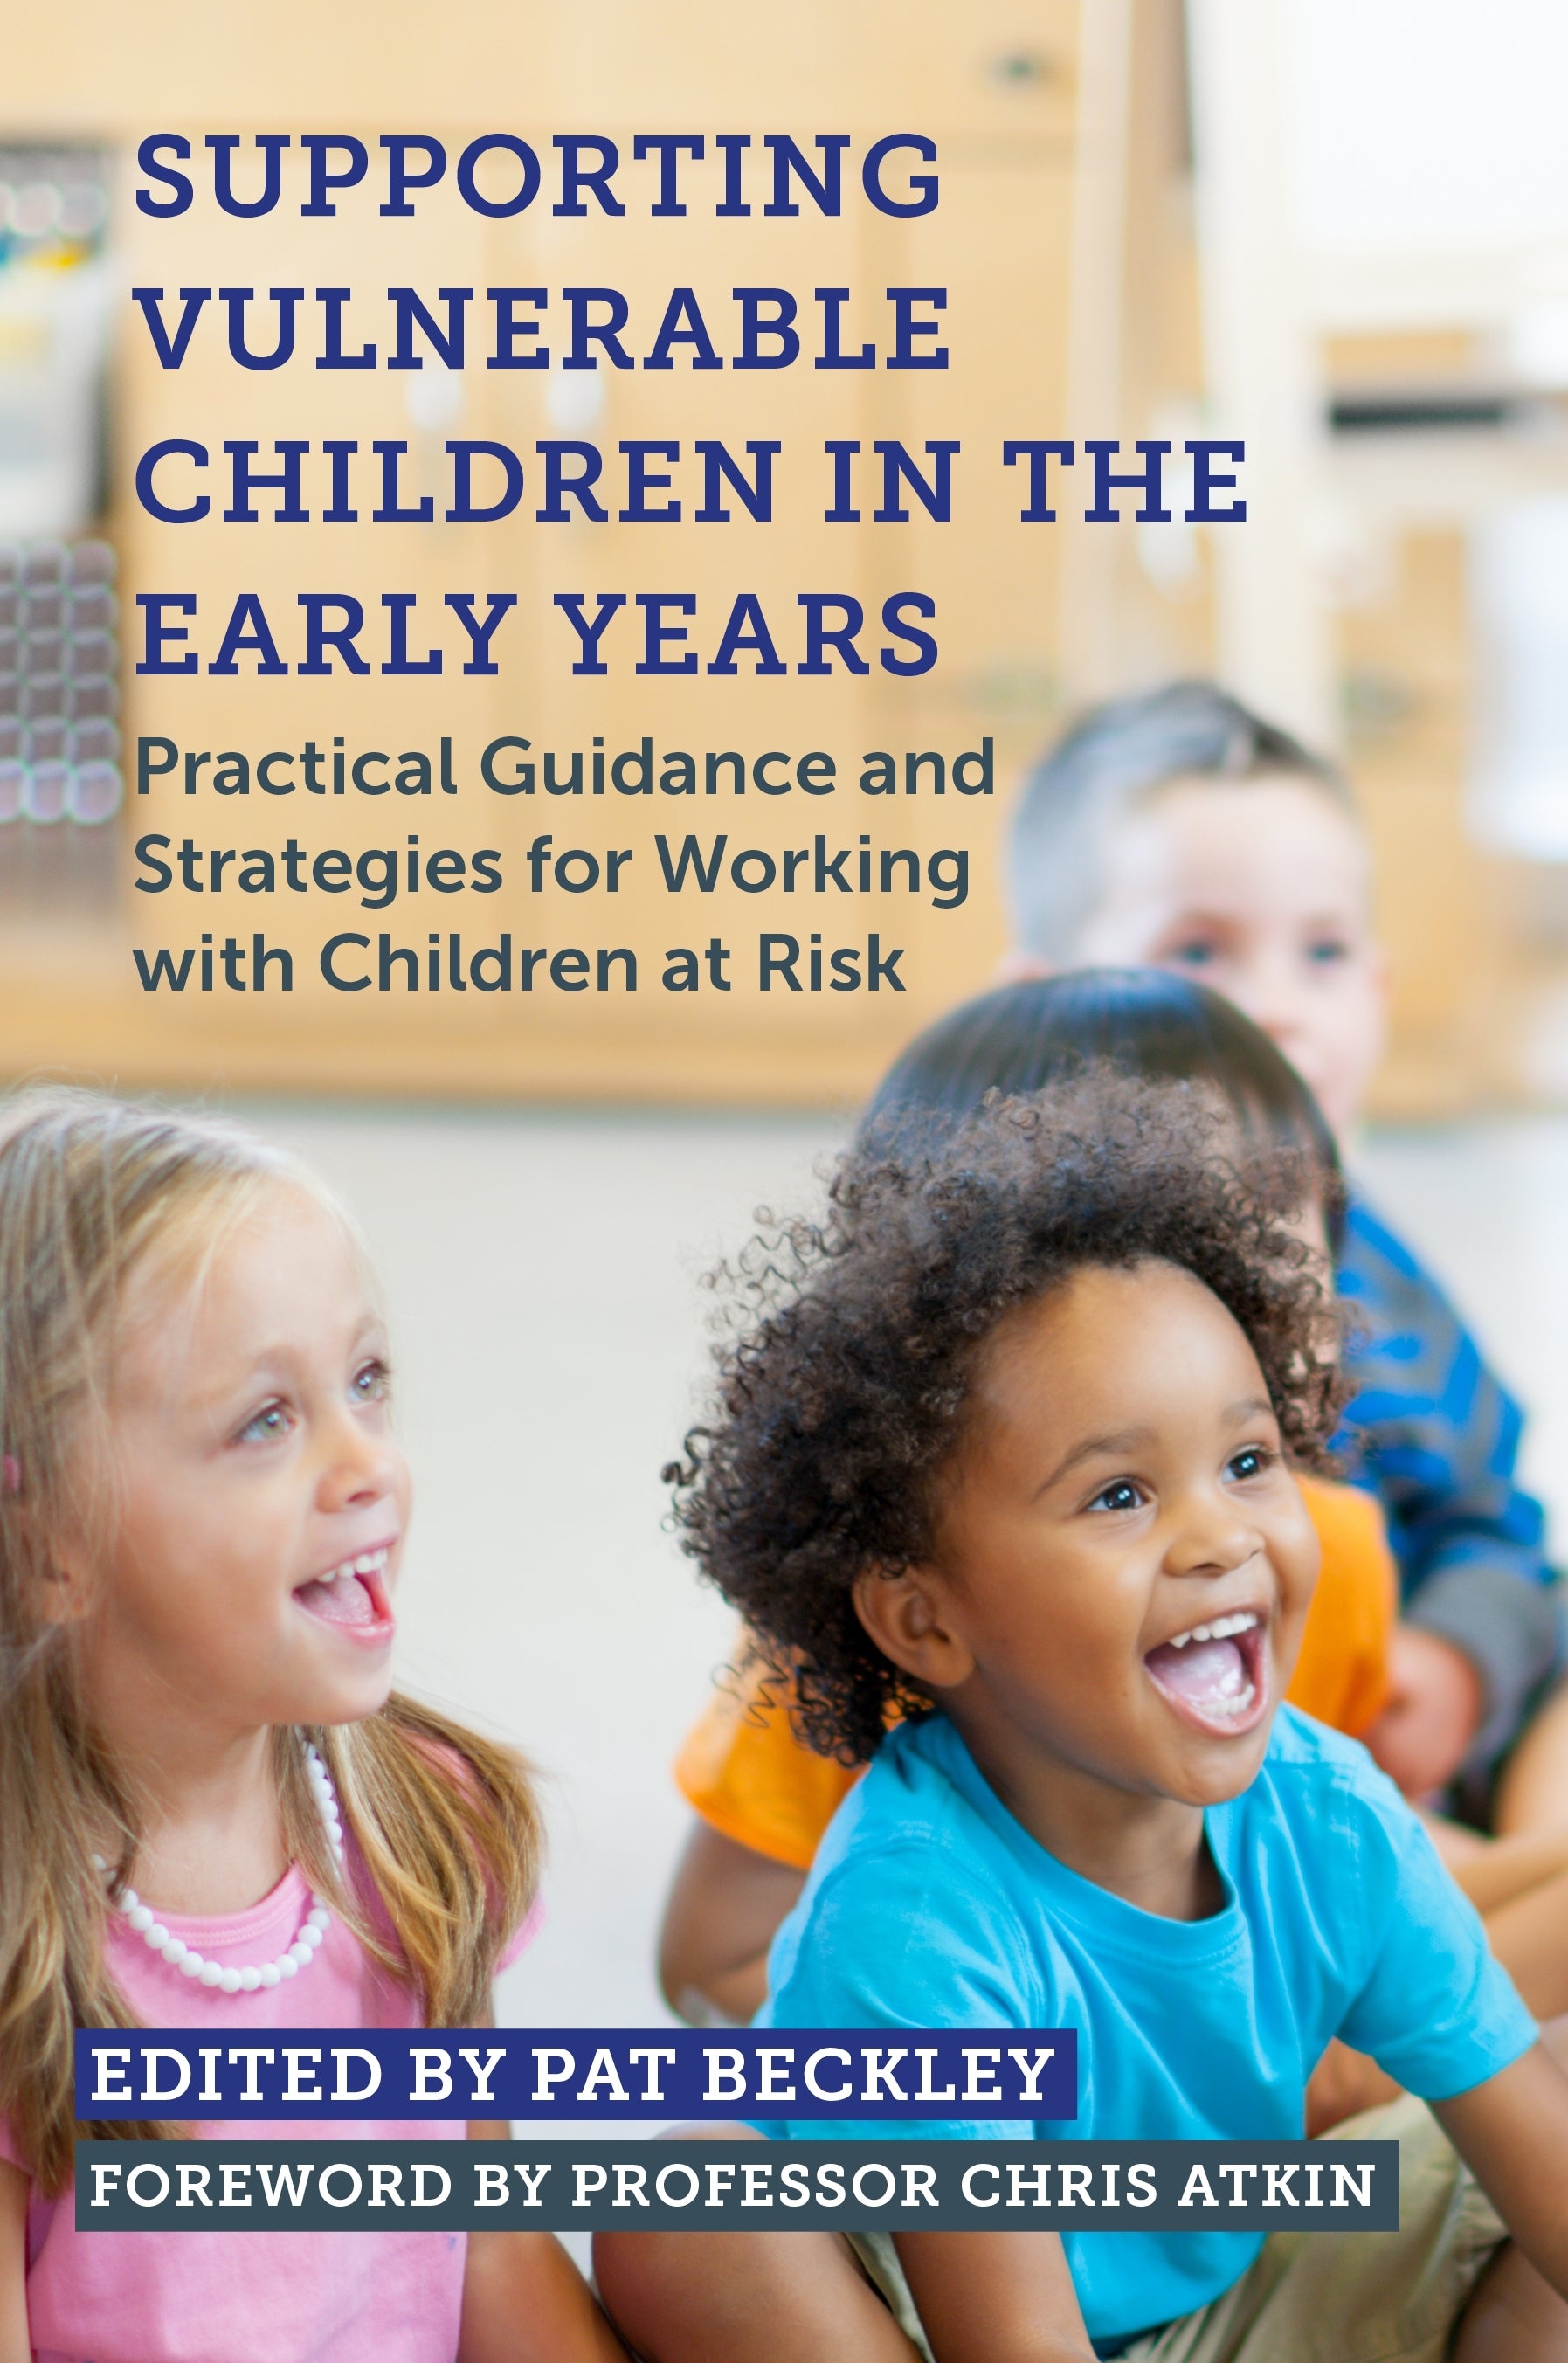 Supporting Vulnerable Children in the Early Years by Pat Beckley, Professor Chris Atkin, No Author Listed